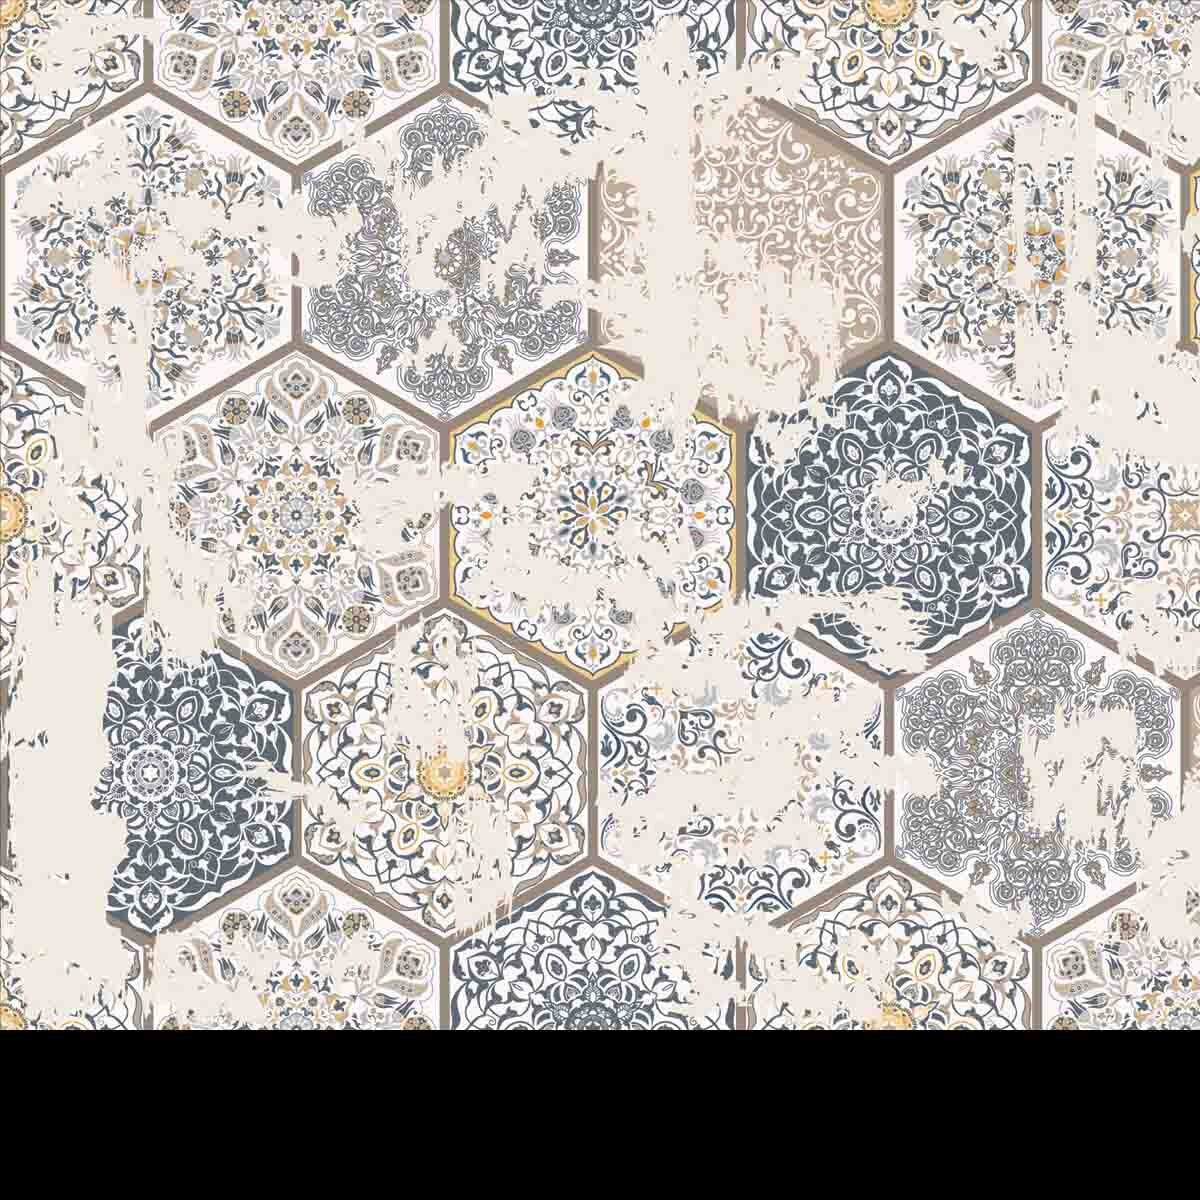 Seamless Vintage Pattern with an Effect of Attrition. Patchwork Tiles Wallpaper Bathroom Mural